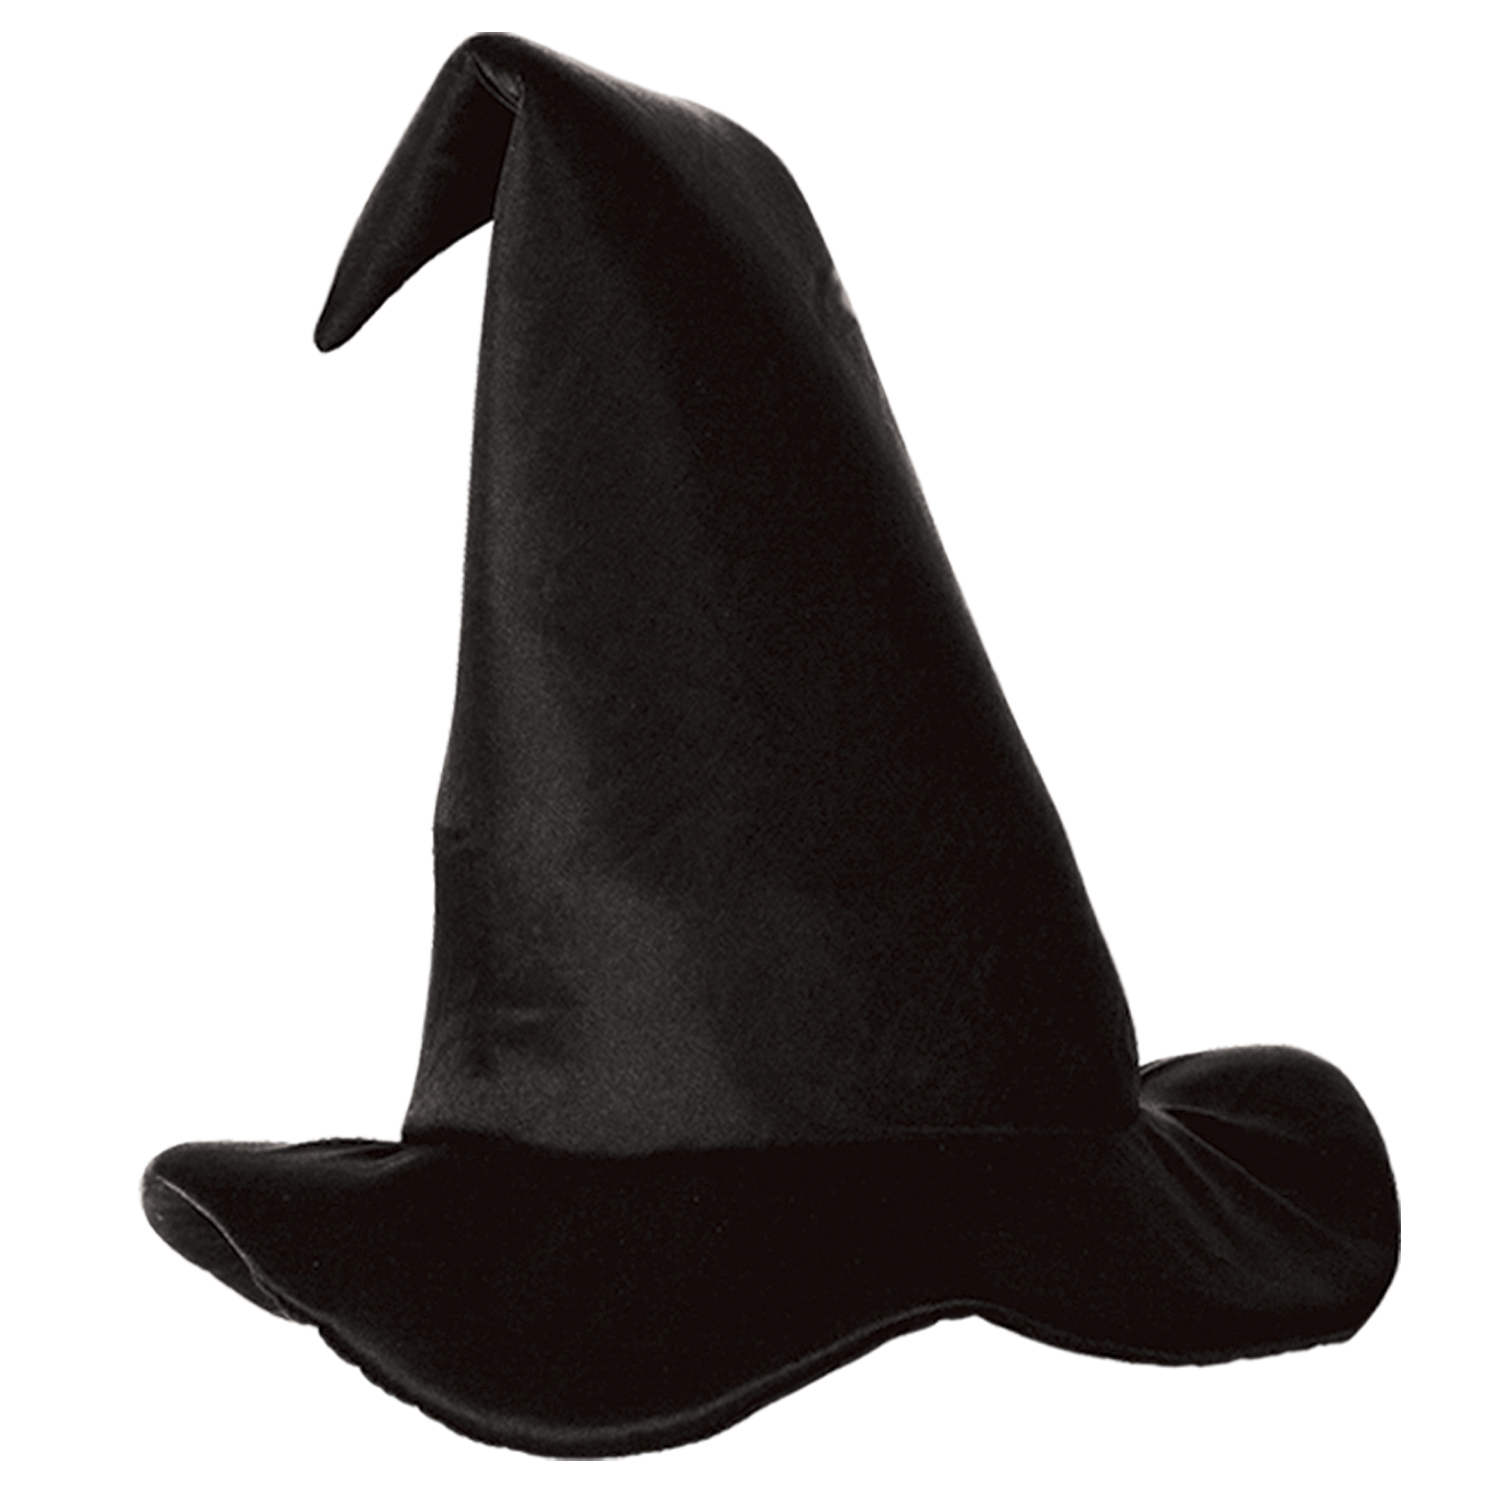 12 Pieces of Satin-Soft Black Witch Hat